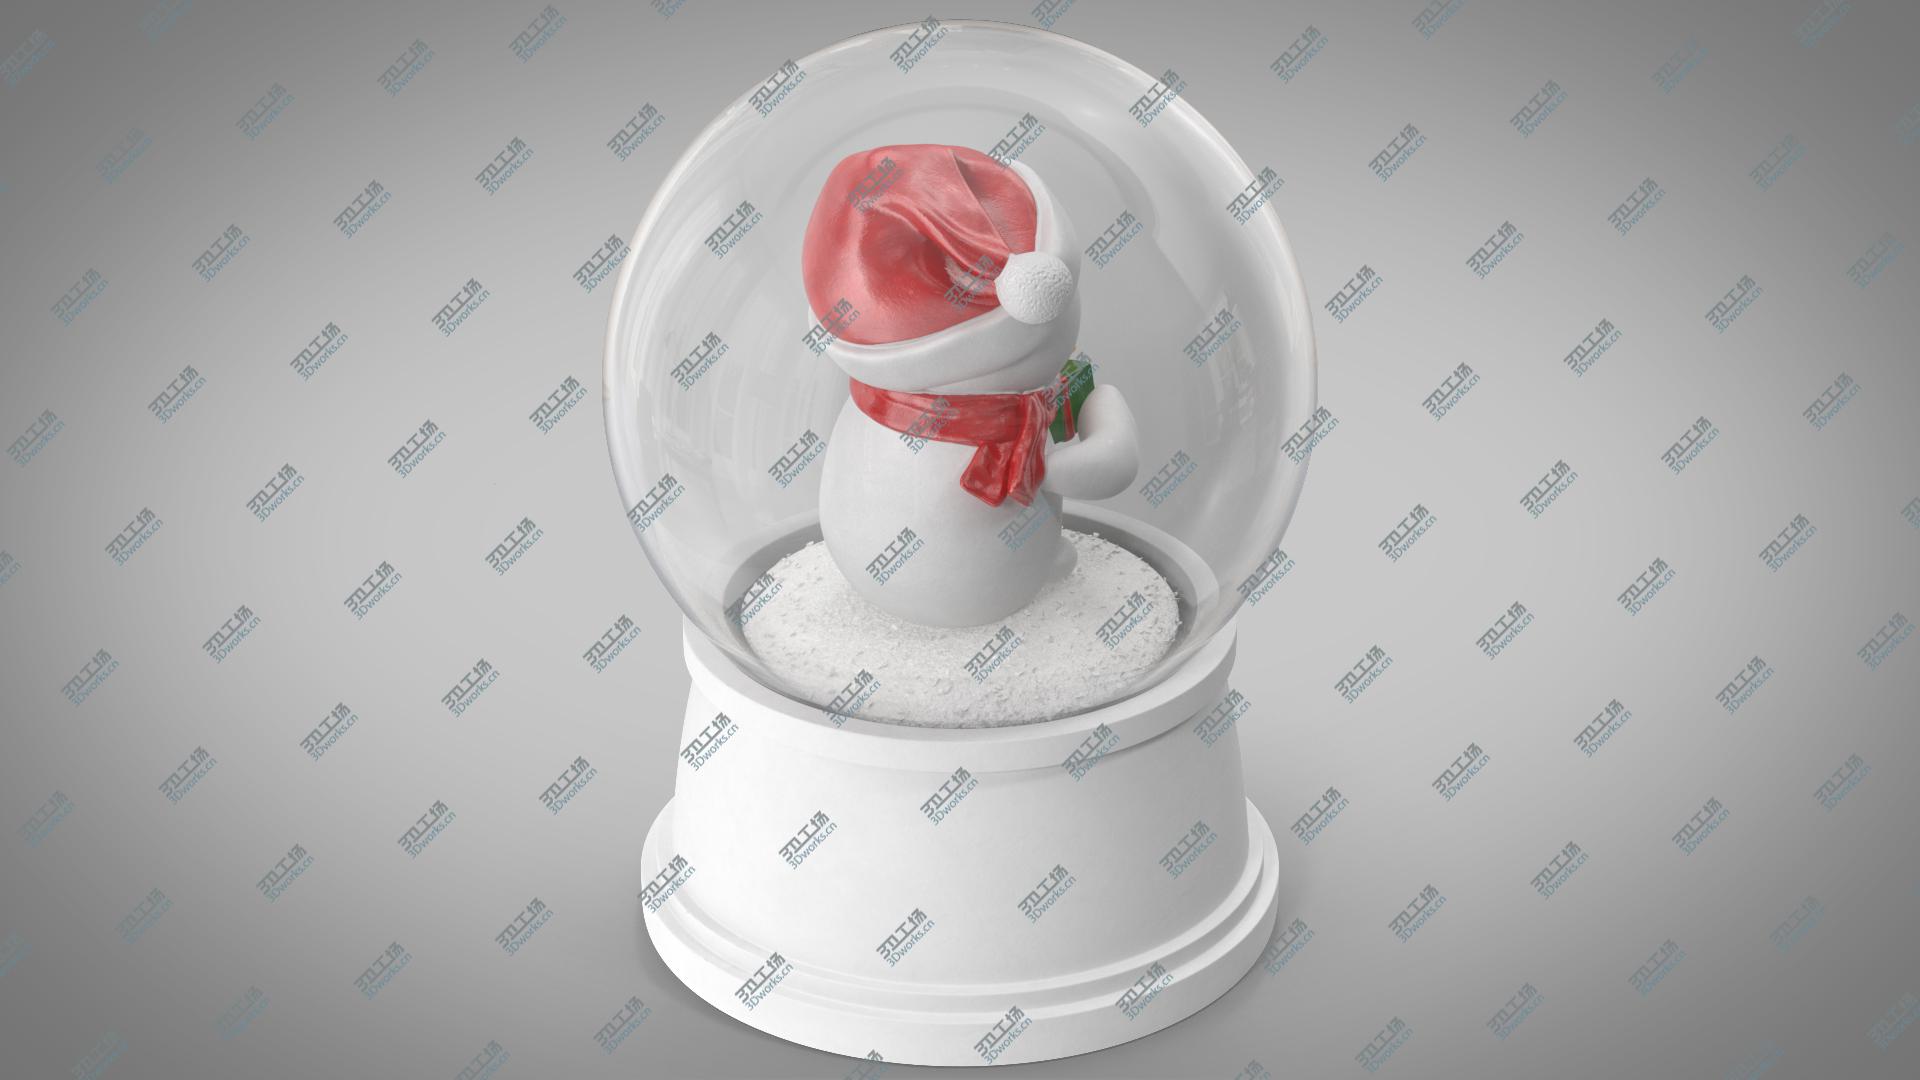 images/goods_img/2021040161/3D Snow Globe with a Snowman 5/4.jpg